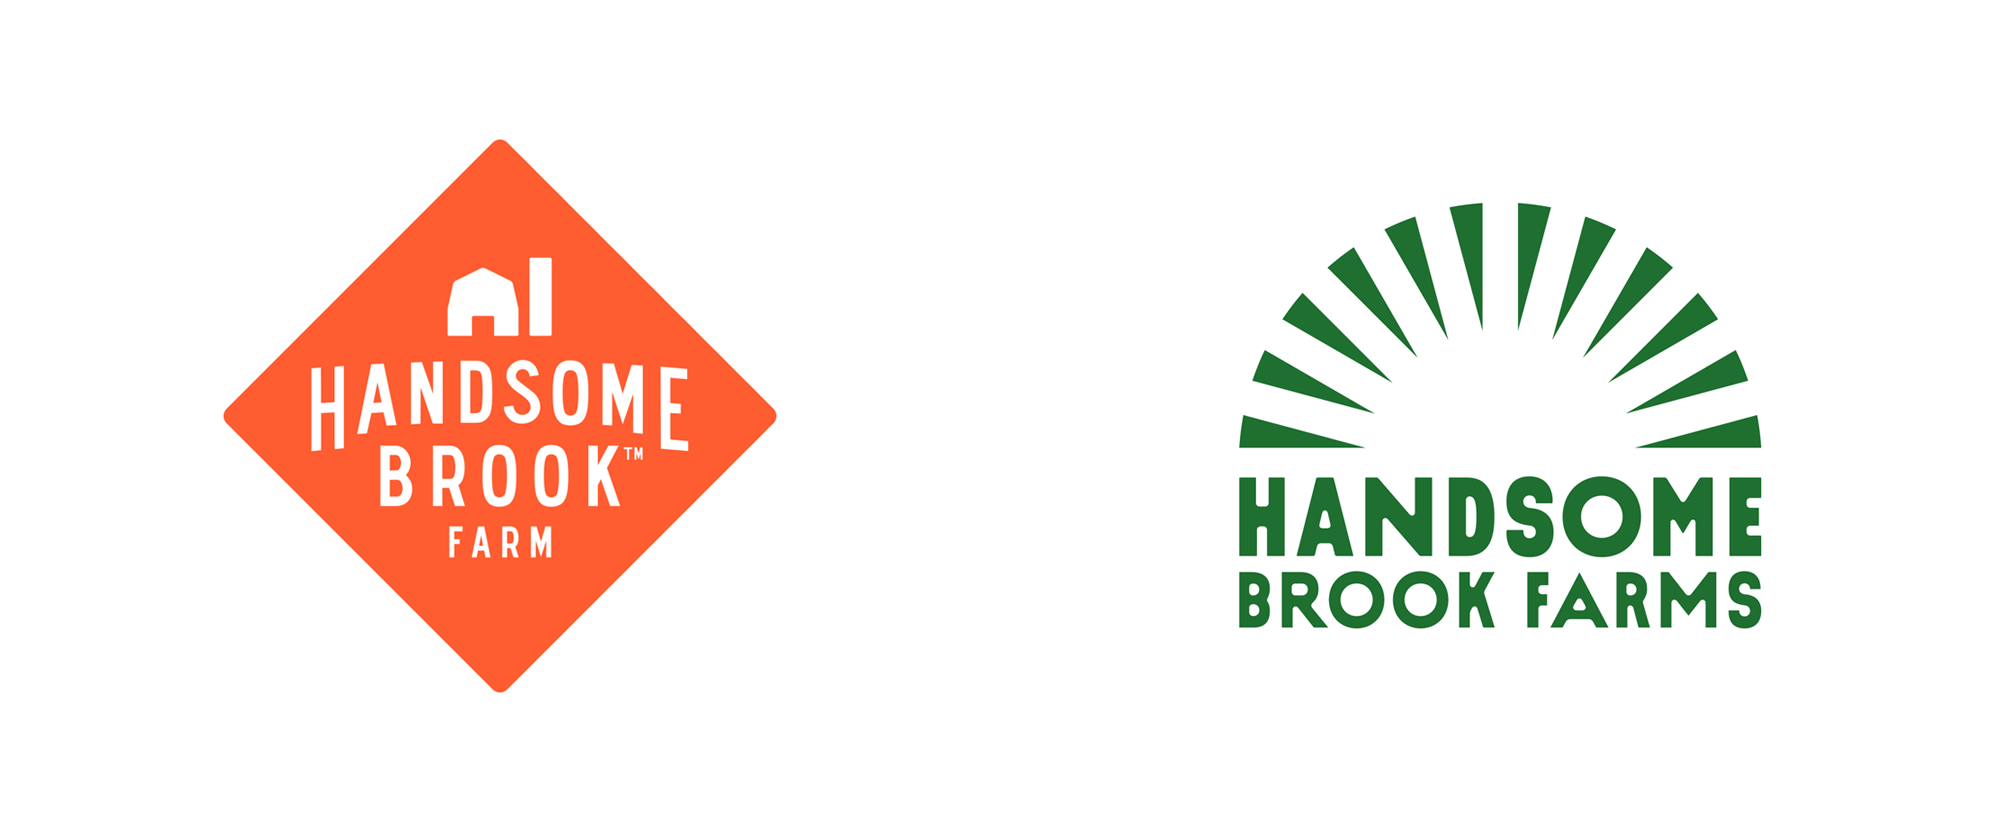 New Logo and Identity for Handsome Brook Farms by Redscout